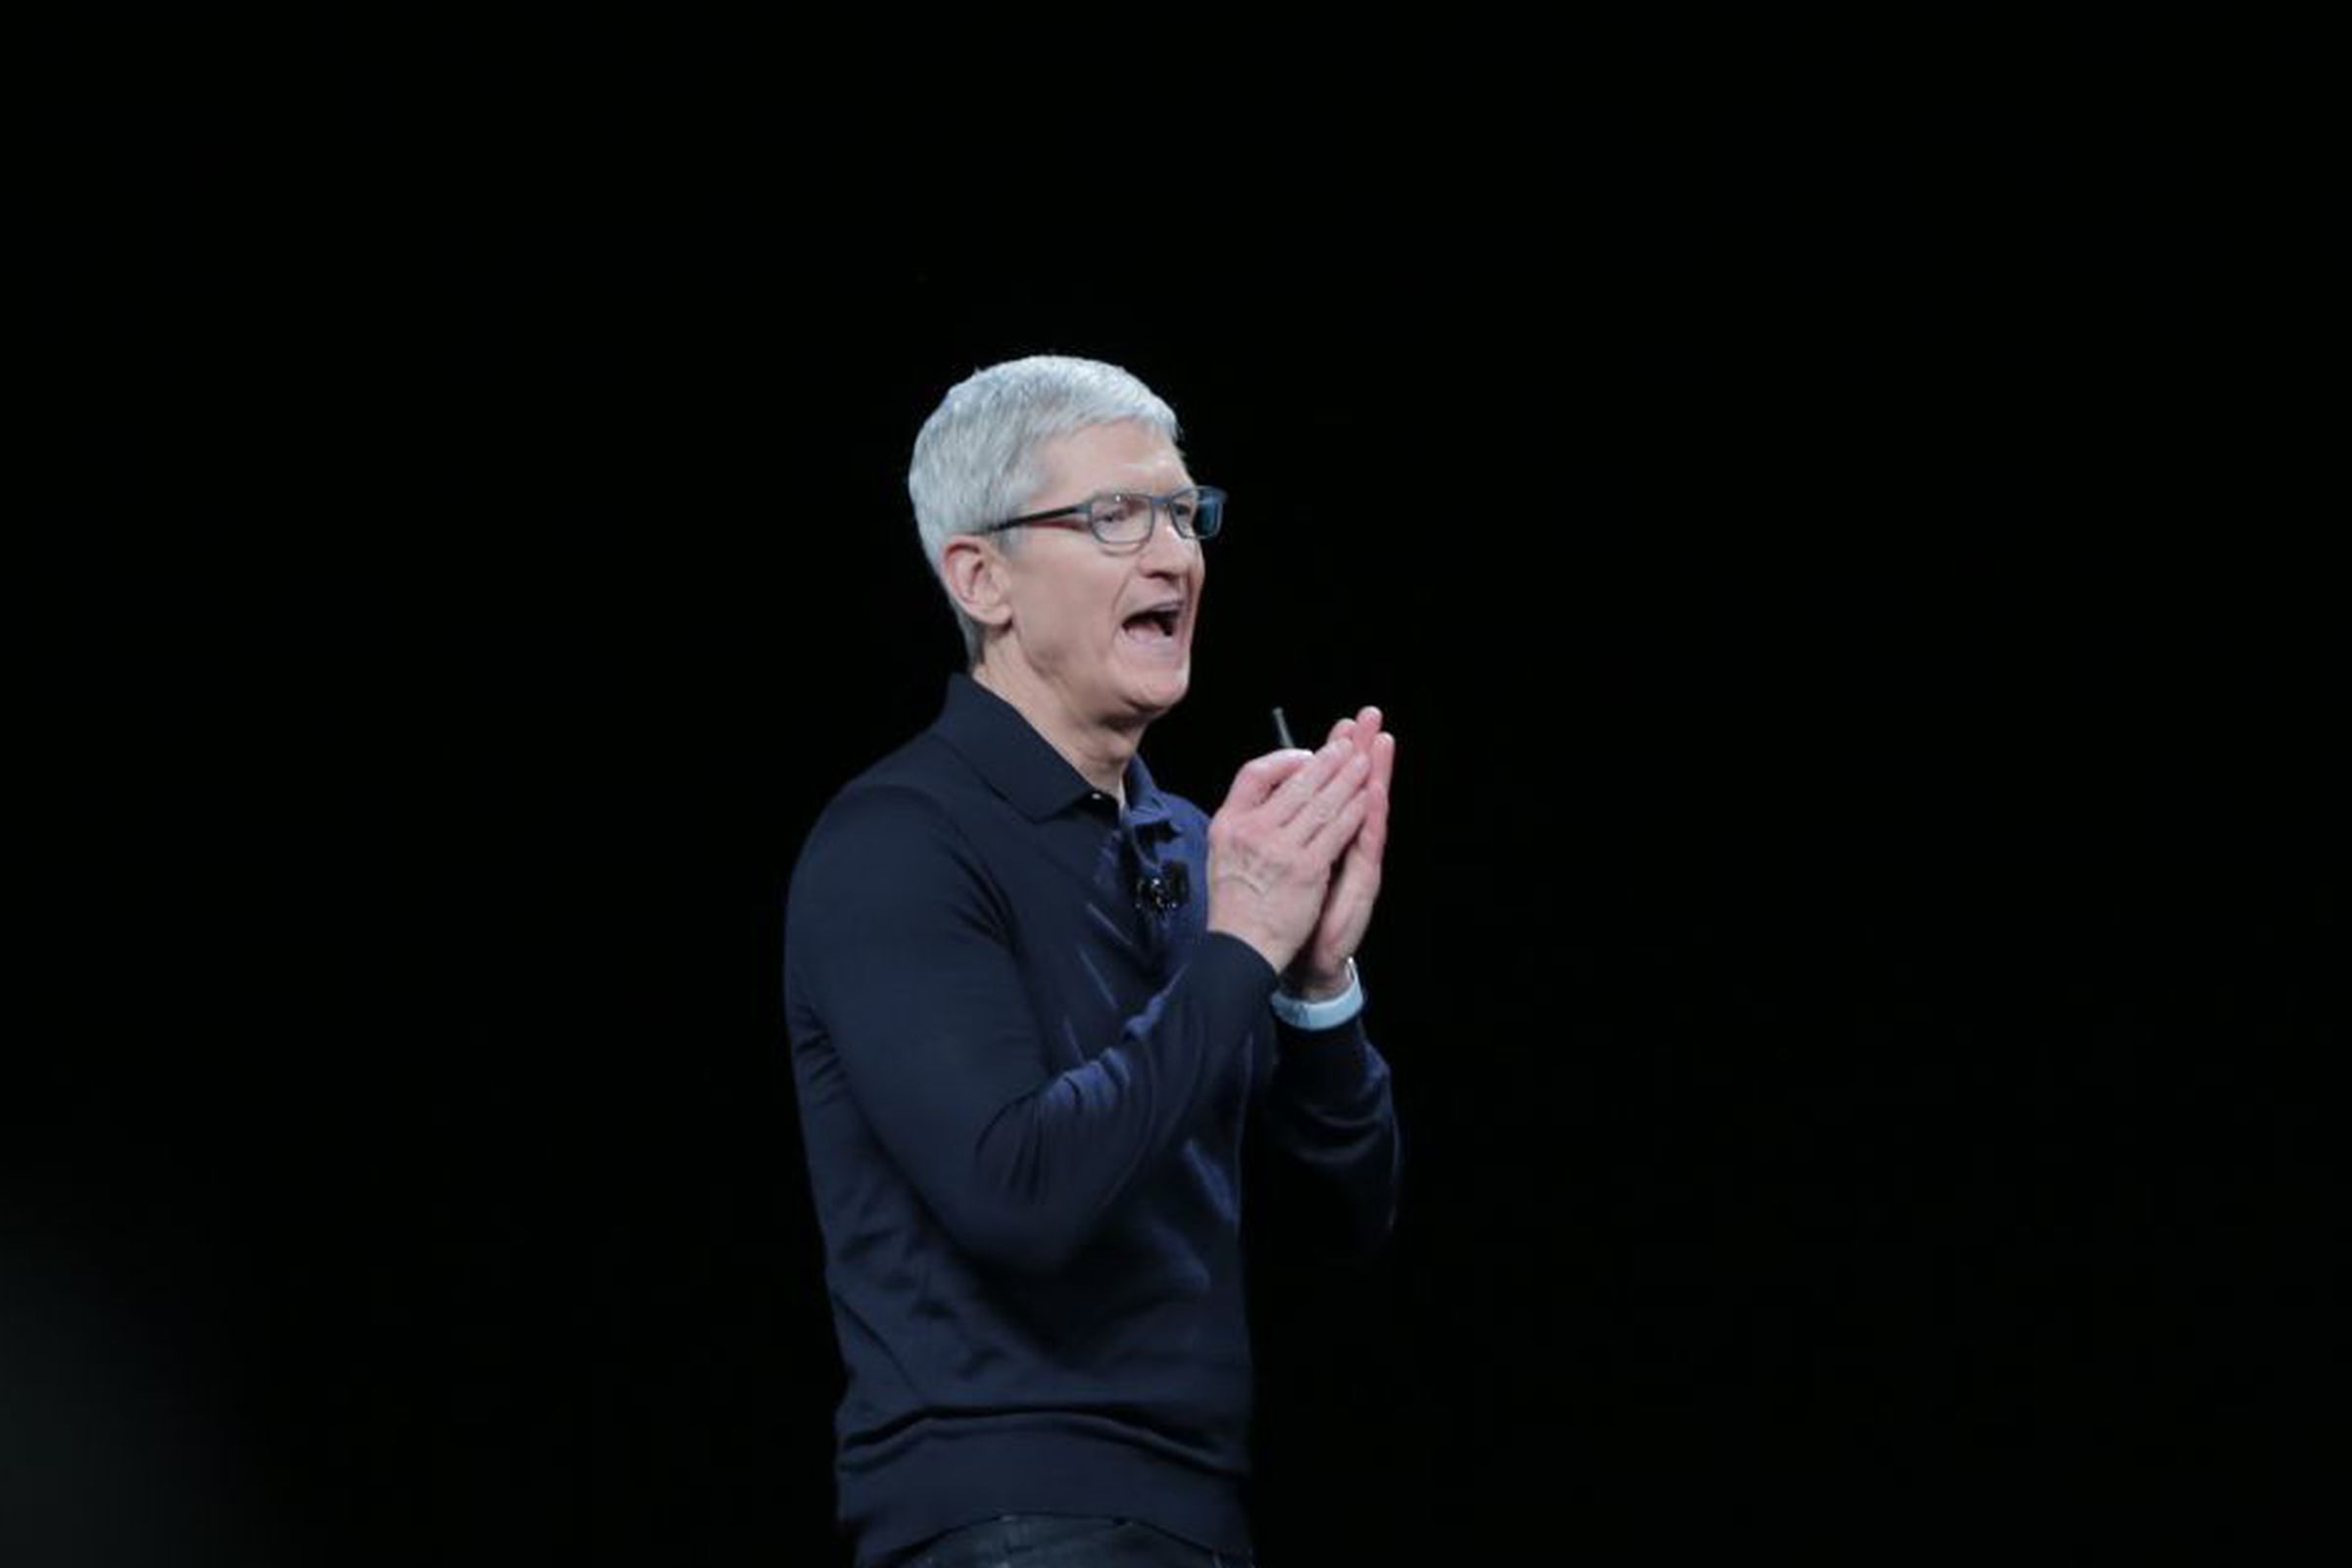 Tim Cook at WWDC 2018